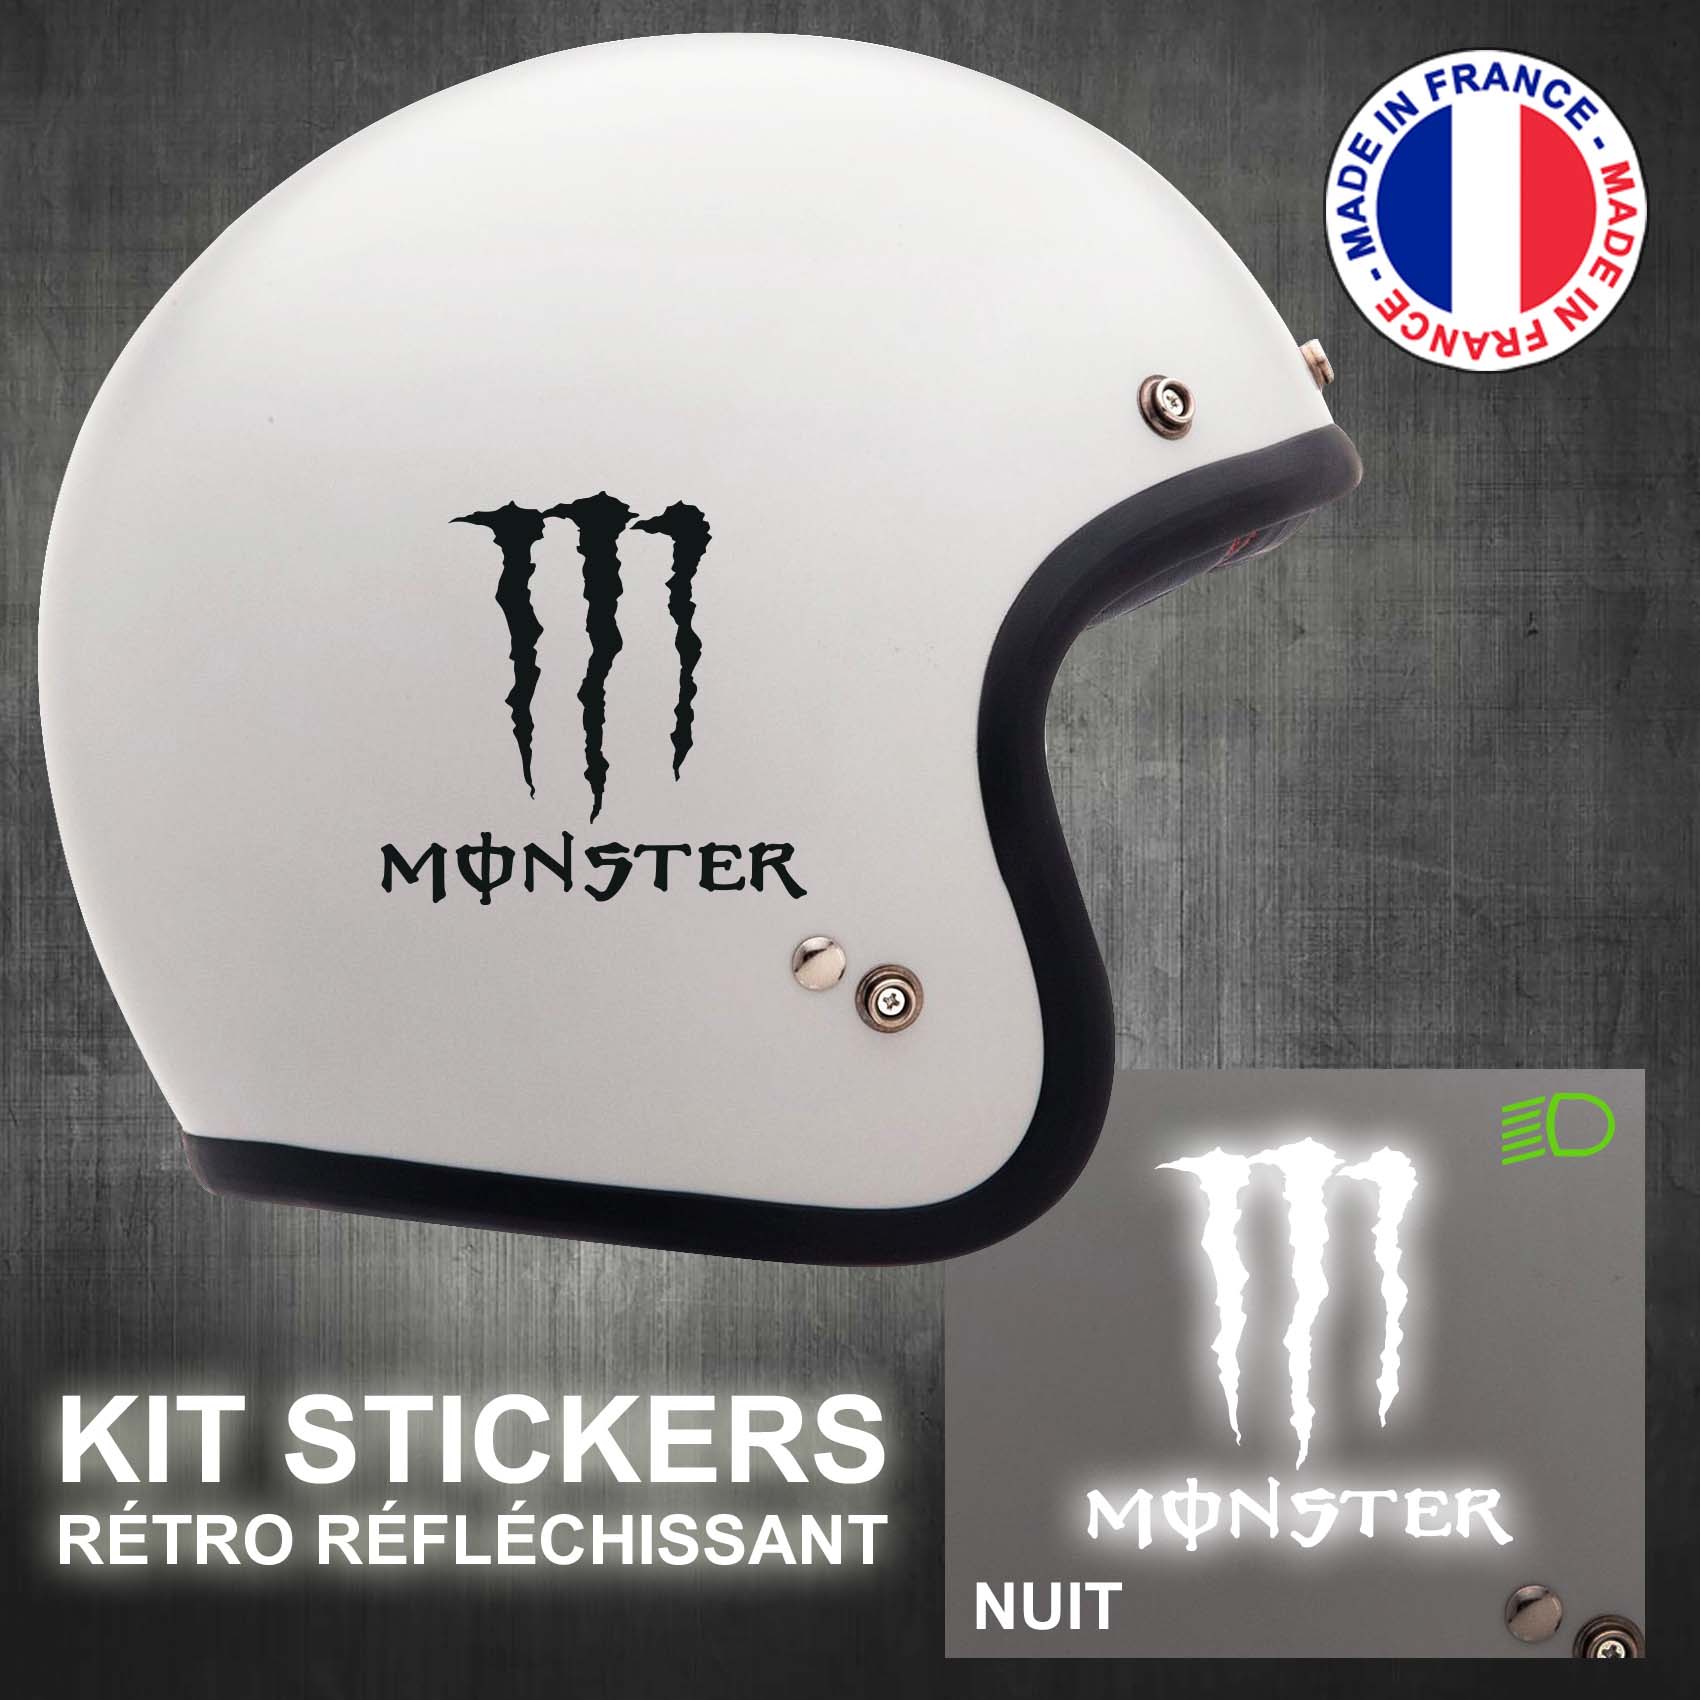 stickers-casque-moto-monster-ref1-retro-reflechissant-autocollant-moto-velo-tuning-racing-route-sticker-casques-adhesif-scooter-nuit-securite-decals-personnalise-personnalisable-min